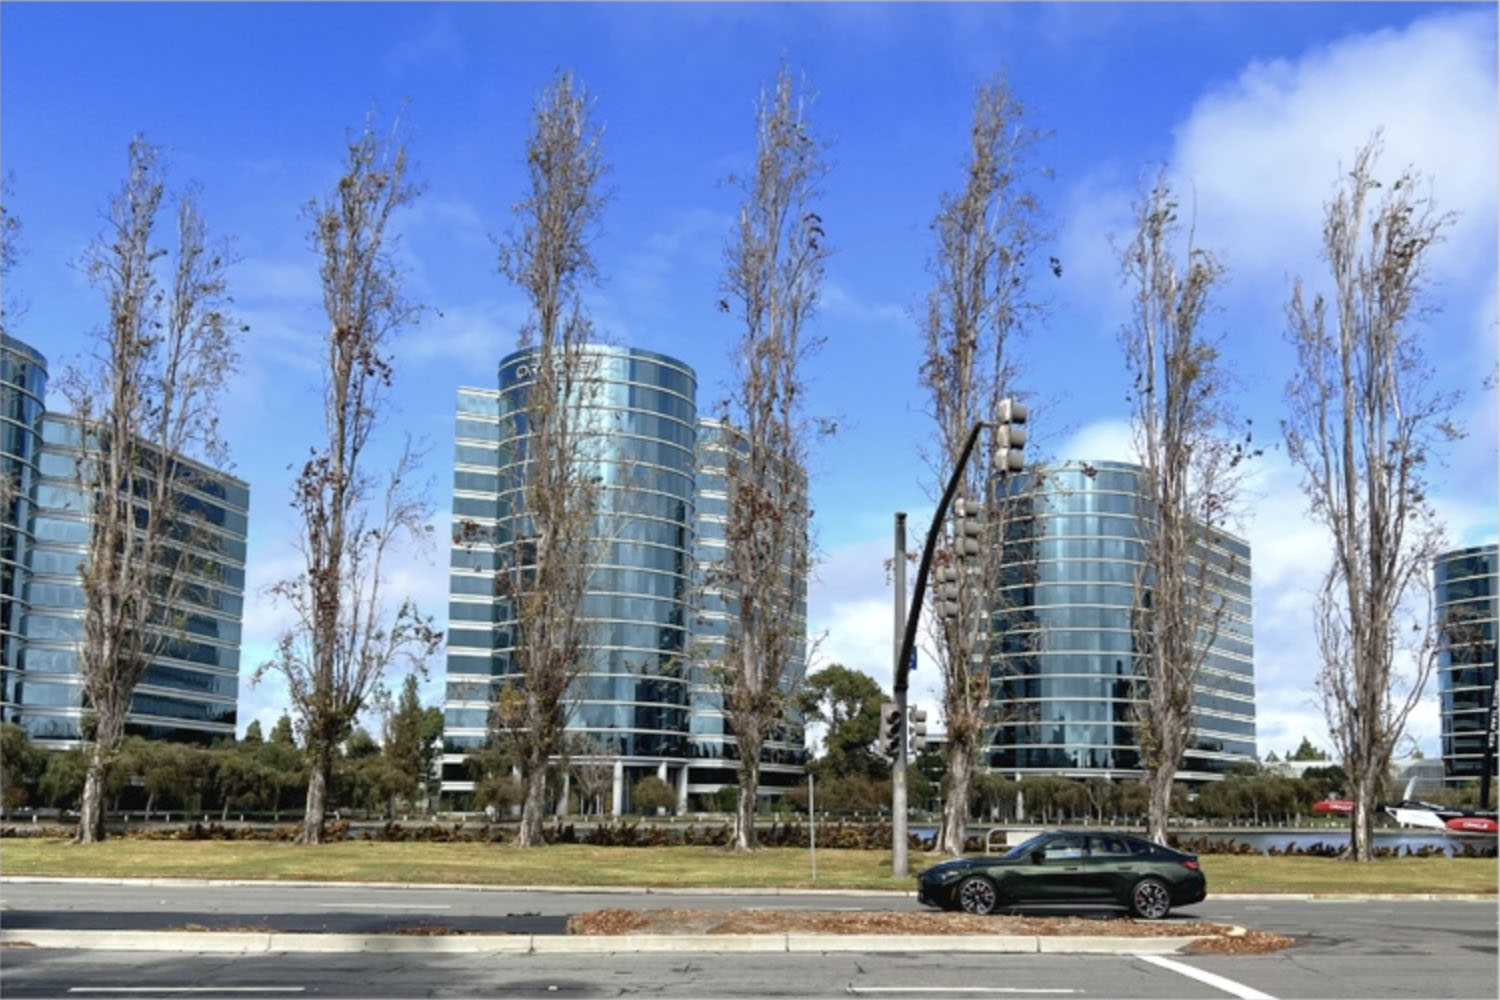 selling Bay area offices to unwind COVID expansion